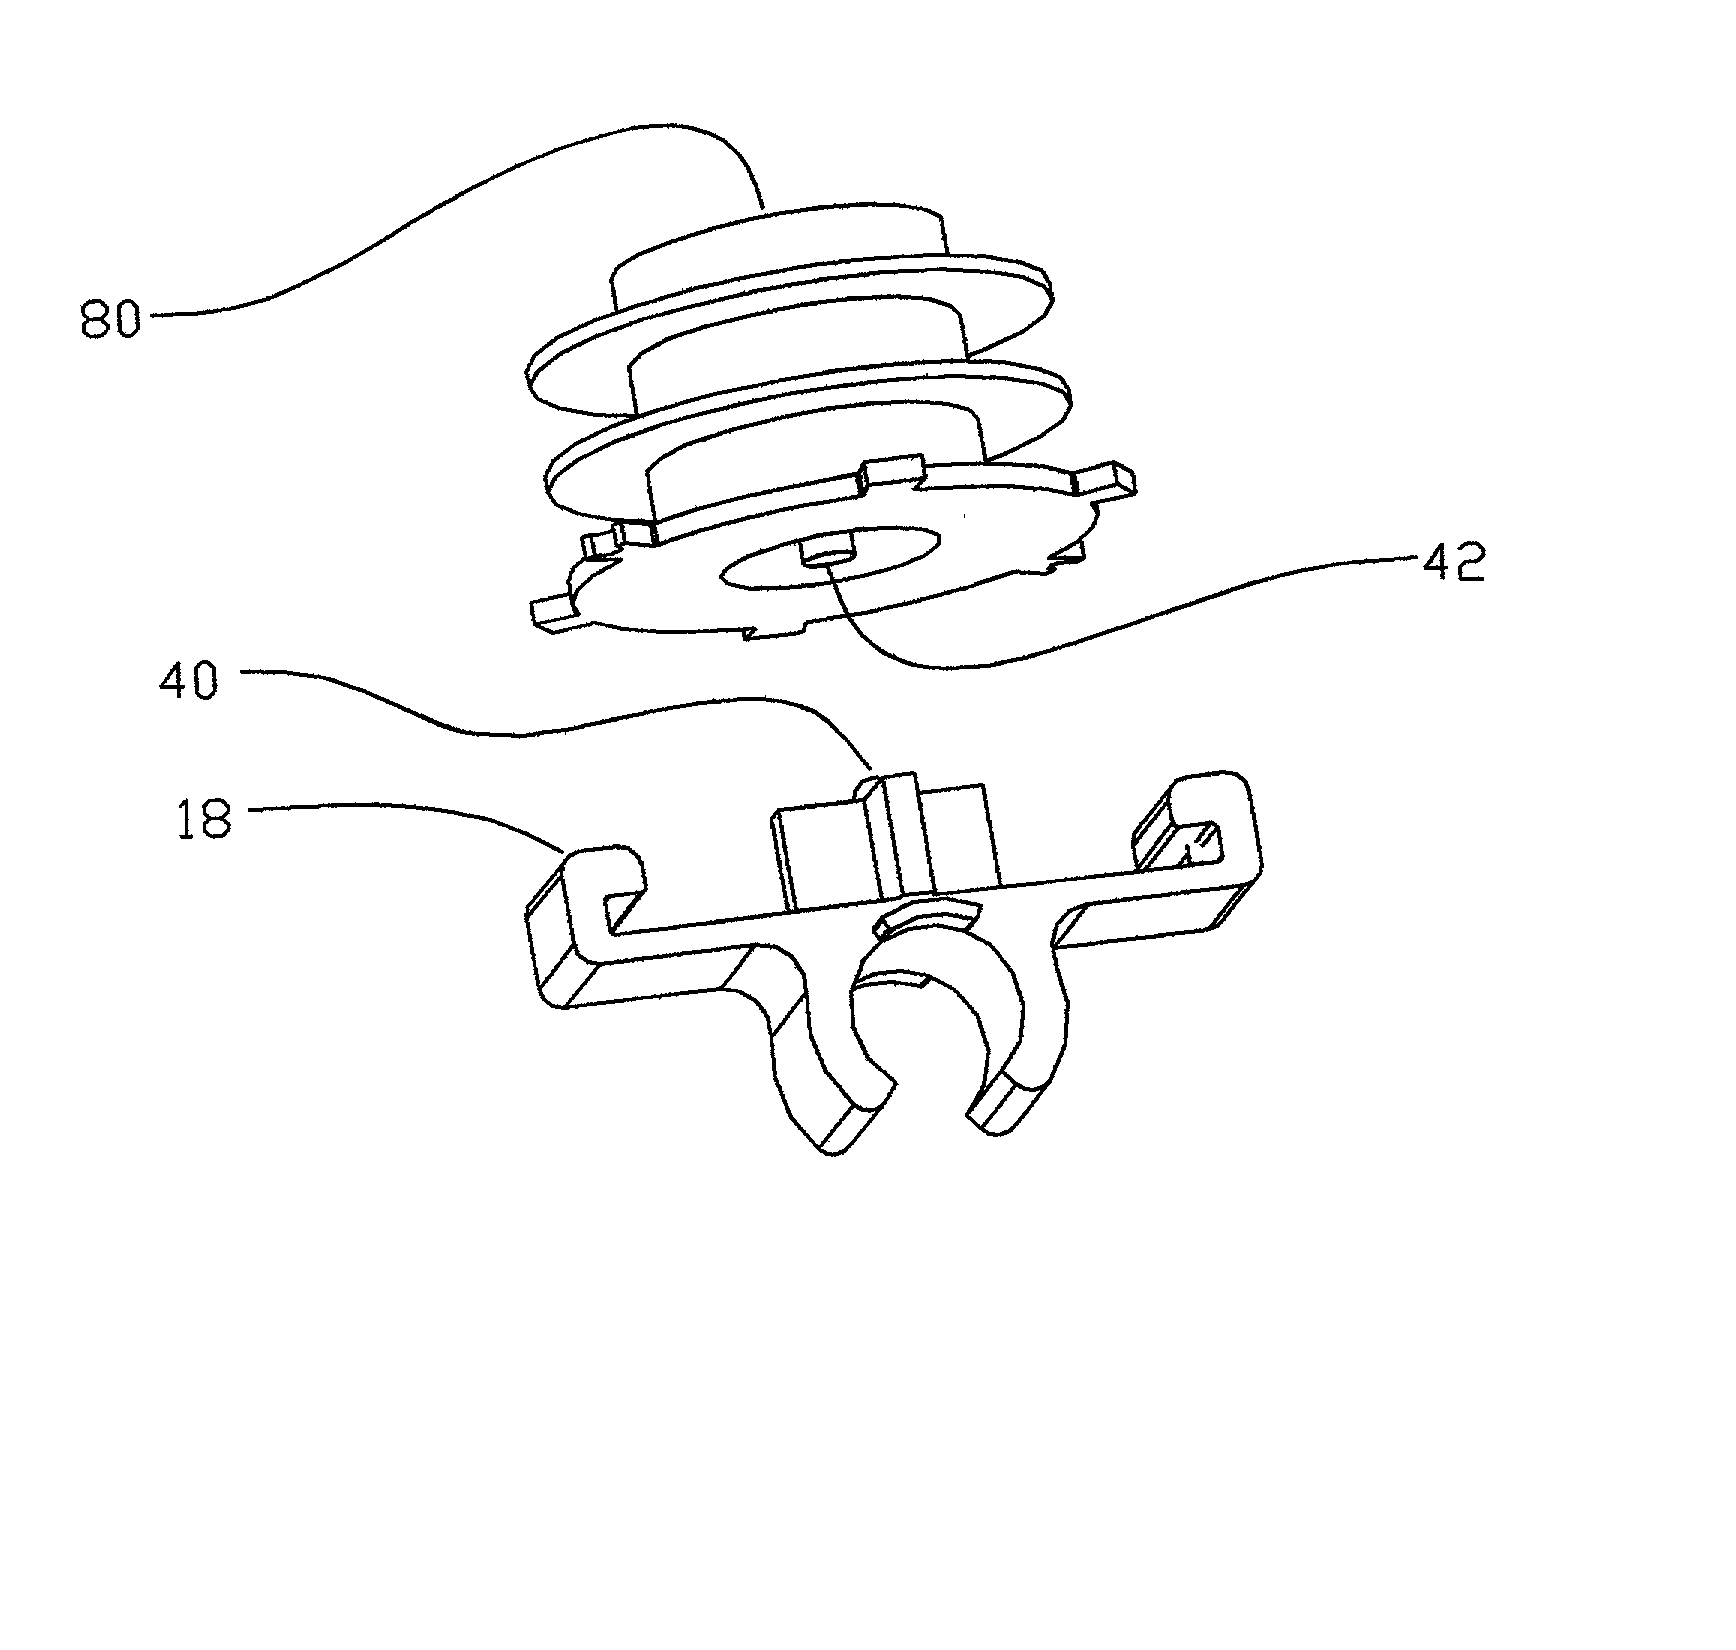 Holding device for spare string trimmer line spools